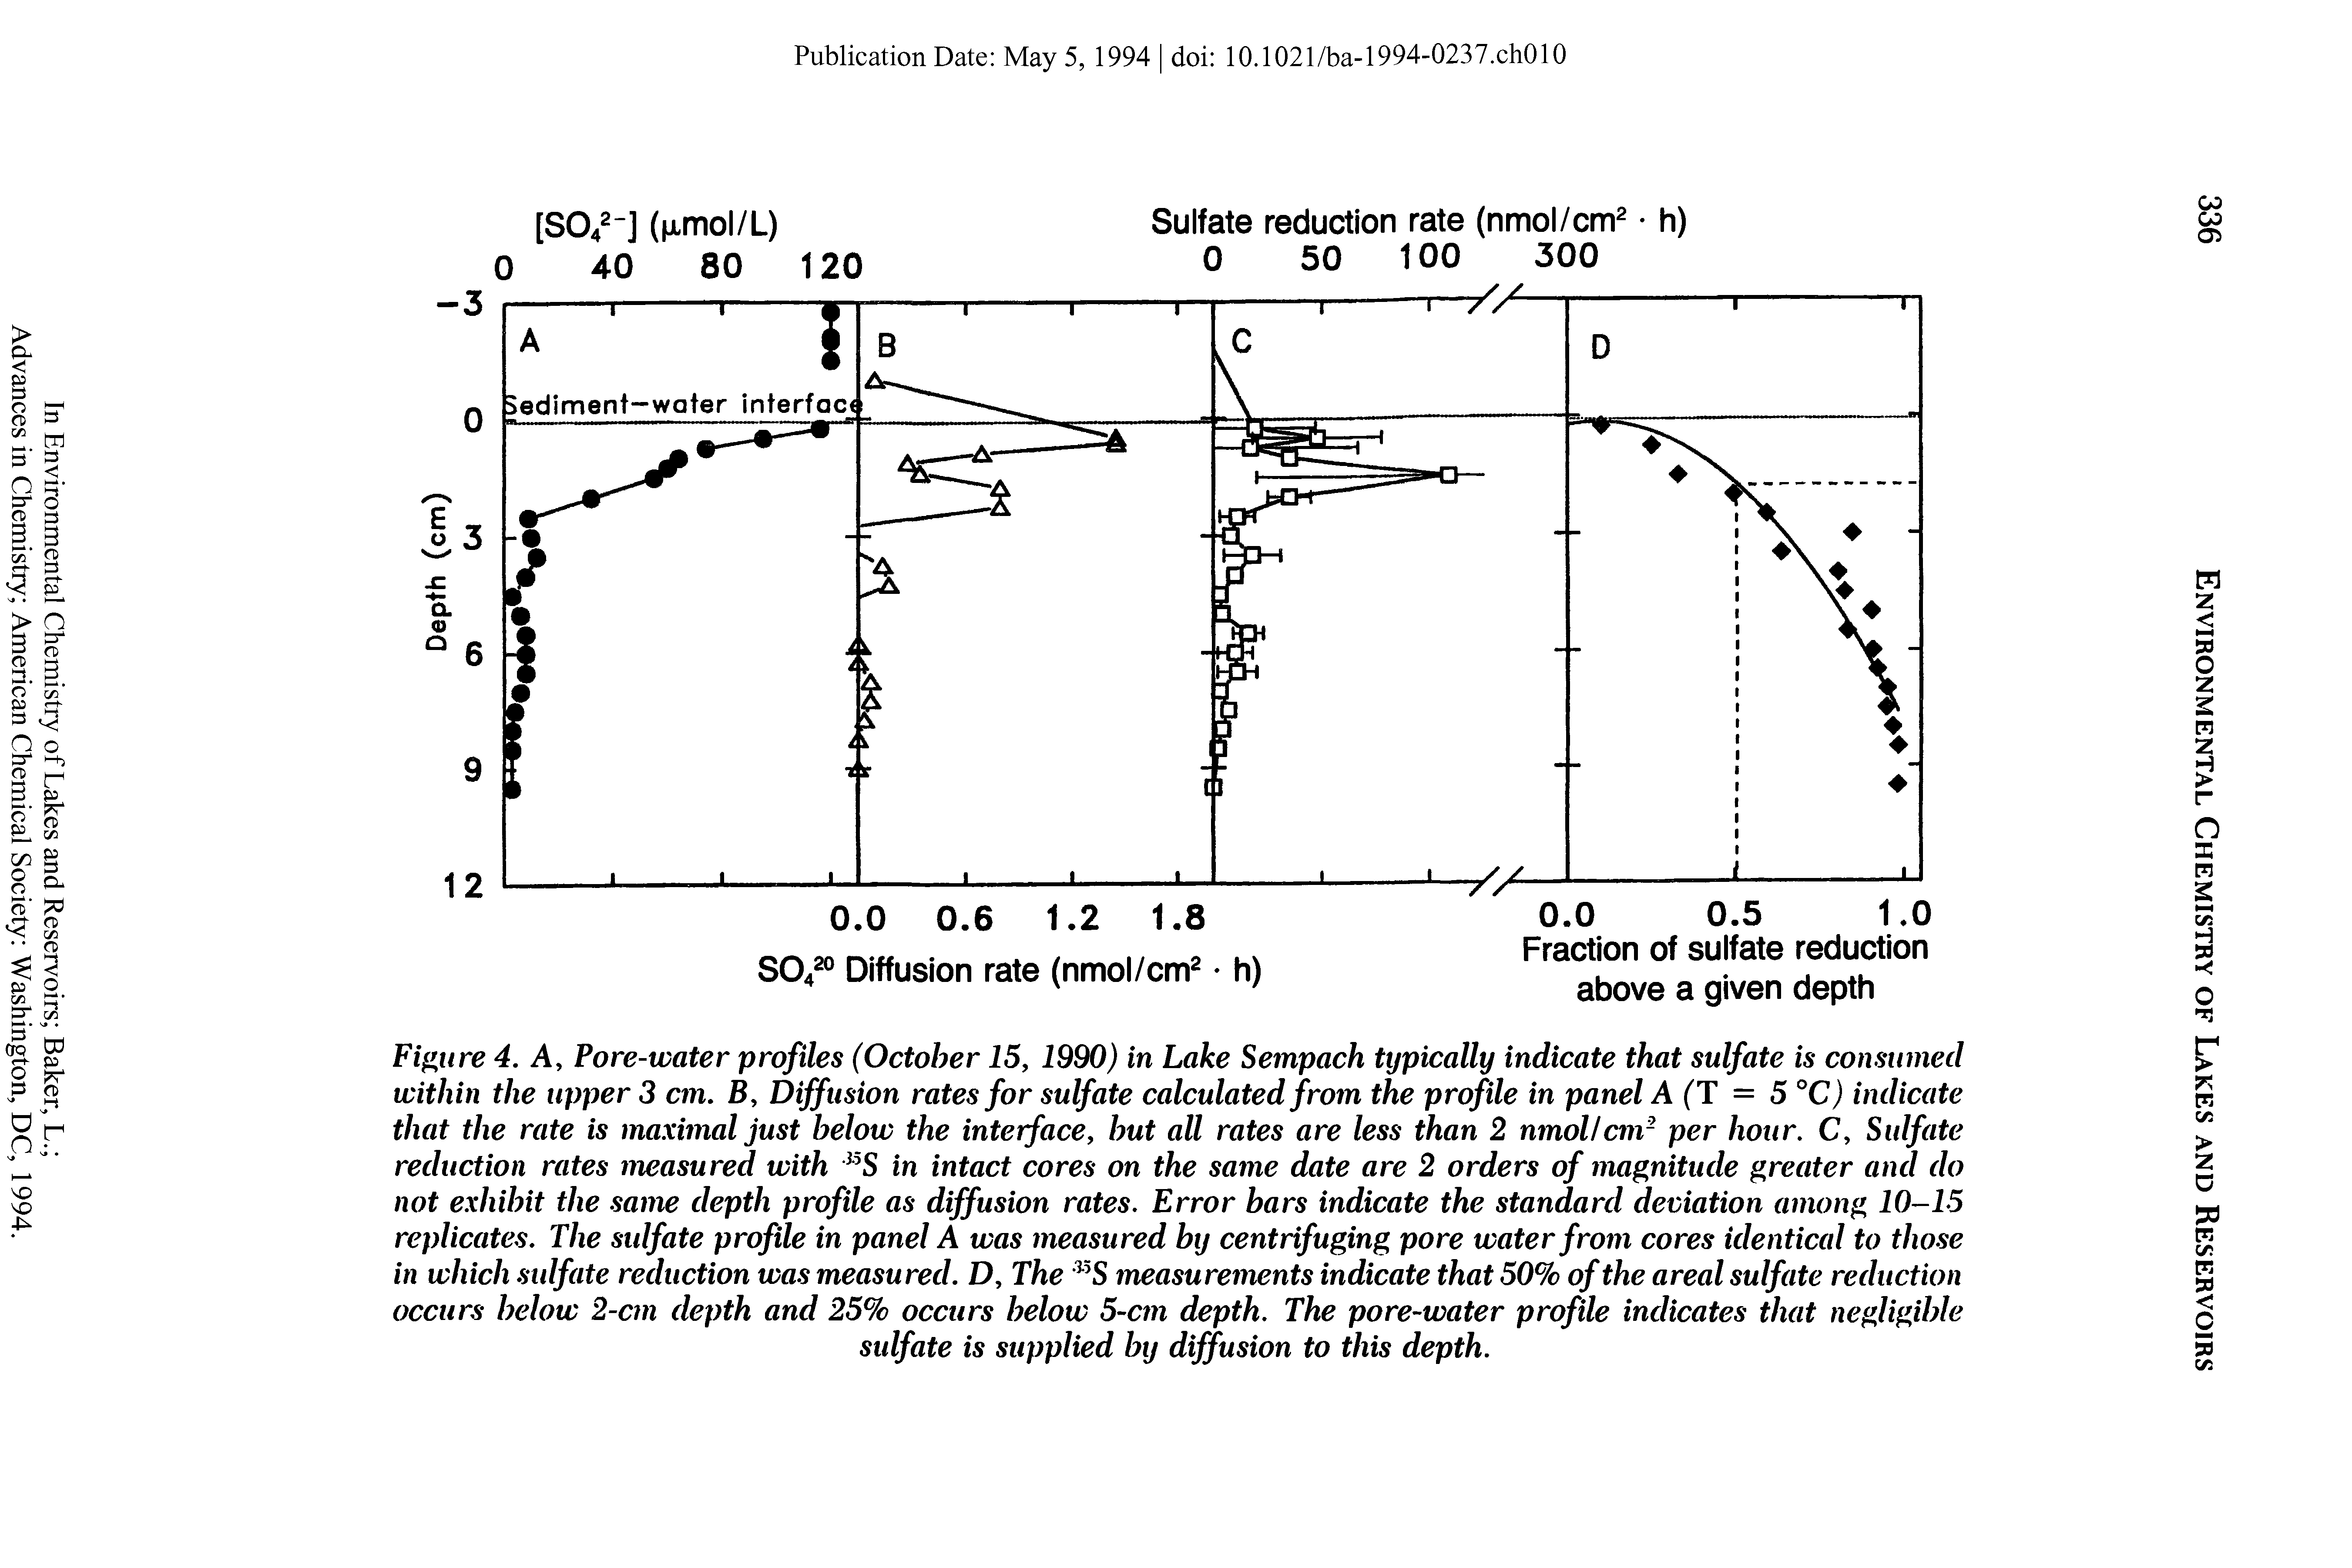 Figure 4. A, Pore-water profiles (October 15, 1990) in Lake Sempach typically indicate that sulfate is consumed within the upper 3 cm. B, Diffusion rates for sulfate calculated from the profile in panel A (T = 5°C) indicate that the rate is maximal just below the interface, but all rates are less than 2 nmol/cm2 per hour. C, Sulfate reduction rates measured with 15S in intact cores on the same date are 2 orders of magnitude greater and do not exhibit the same depth profile as diffusion rates. Error bars indicate the standard deviation among 10-15 replicates. The sulfate profile in panel A was measured by centrifuging pore water from cores identical to those in which sulfate reduction was measured. D, The 35S measurements indicate that 50% of the areal sulfate reduction occurs below 2-cm depth and 25% occurs below 5-cm depth. The pore-water profile indicates that negligible...